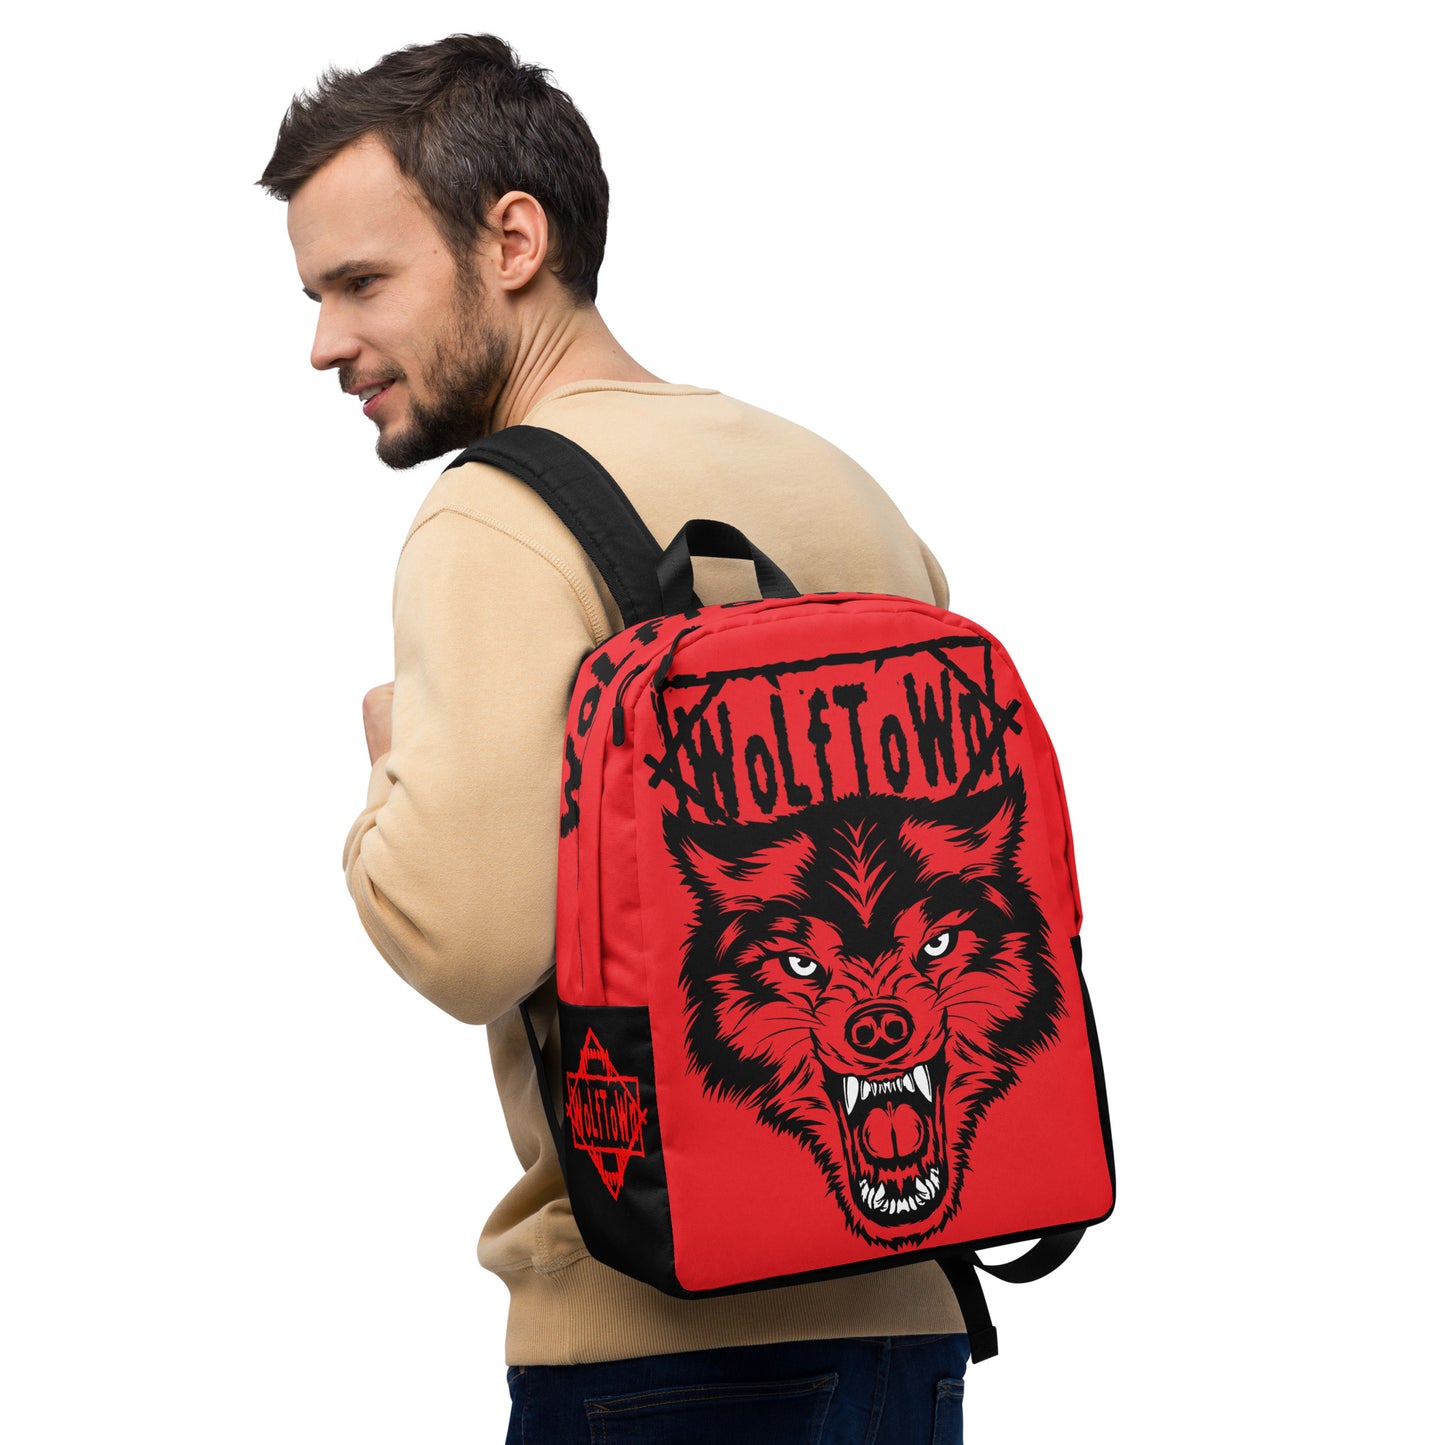 WOLFTOWN 'WOLFPAC' (Backpack)